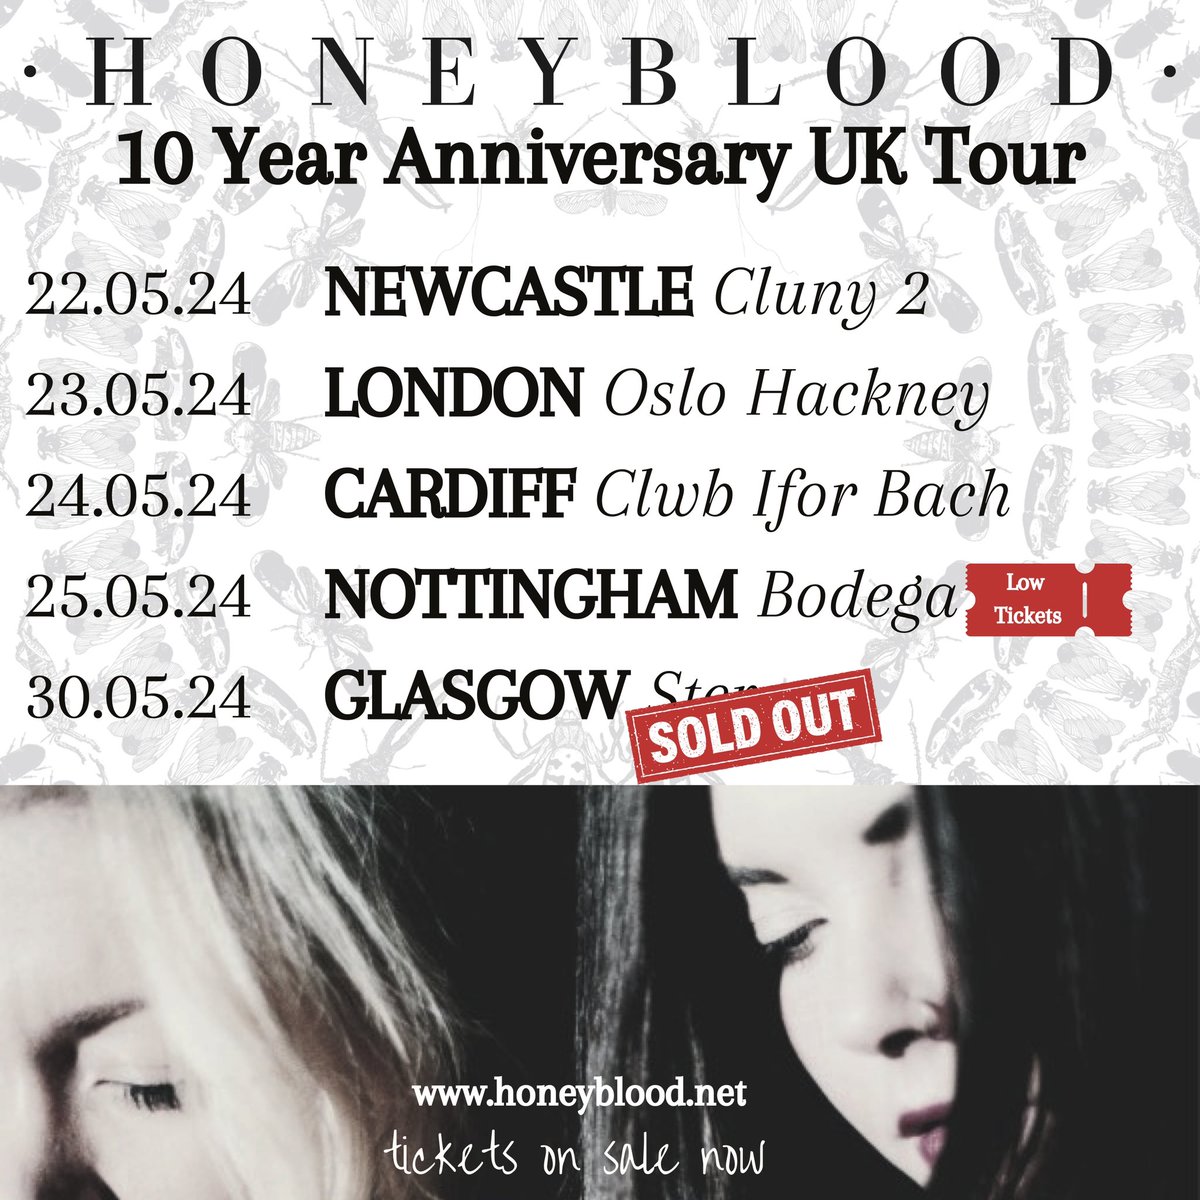 Glasgow 🚨 @stereo_glasgow is now SOLD OUT‼️🔥 Nottingham not far behind so get your tickets for @bodeganotts while you can! 22 May - Newcastle 23 May - London 24 May - Cardiff 25 May - Nottingham [LOW TICKETS] 30 May - Glasgow [SOLD OUT] honeyblood.net/live